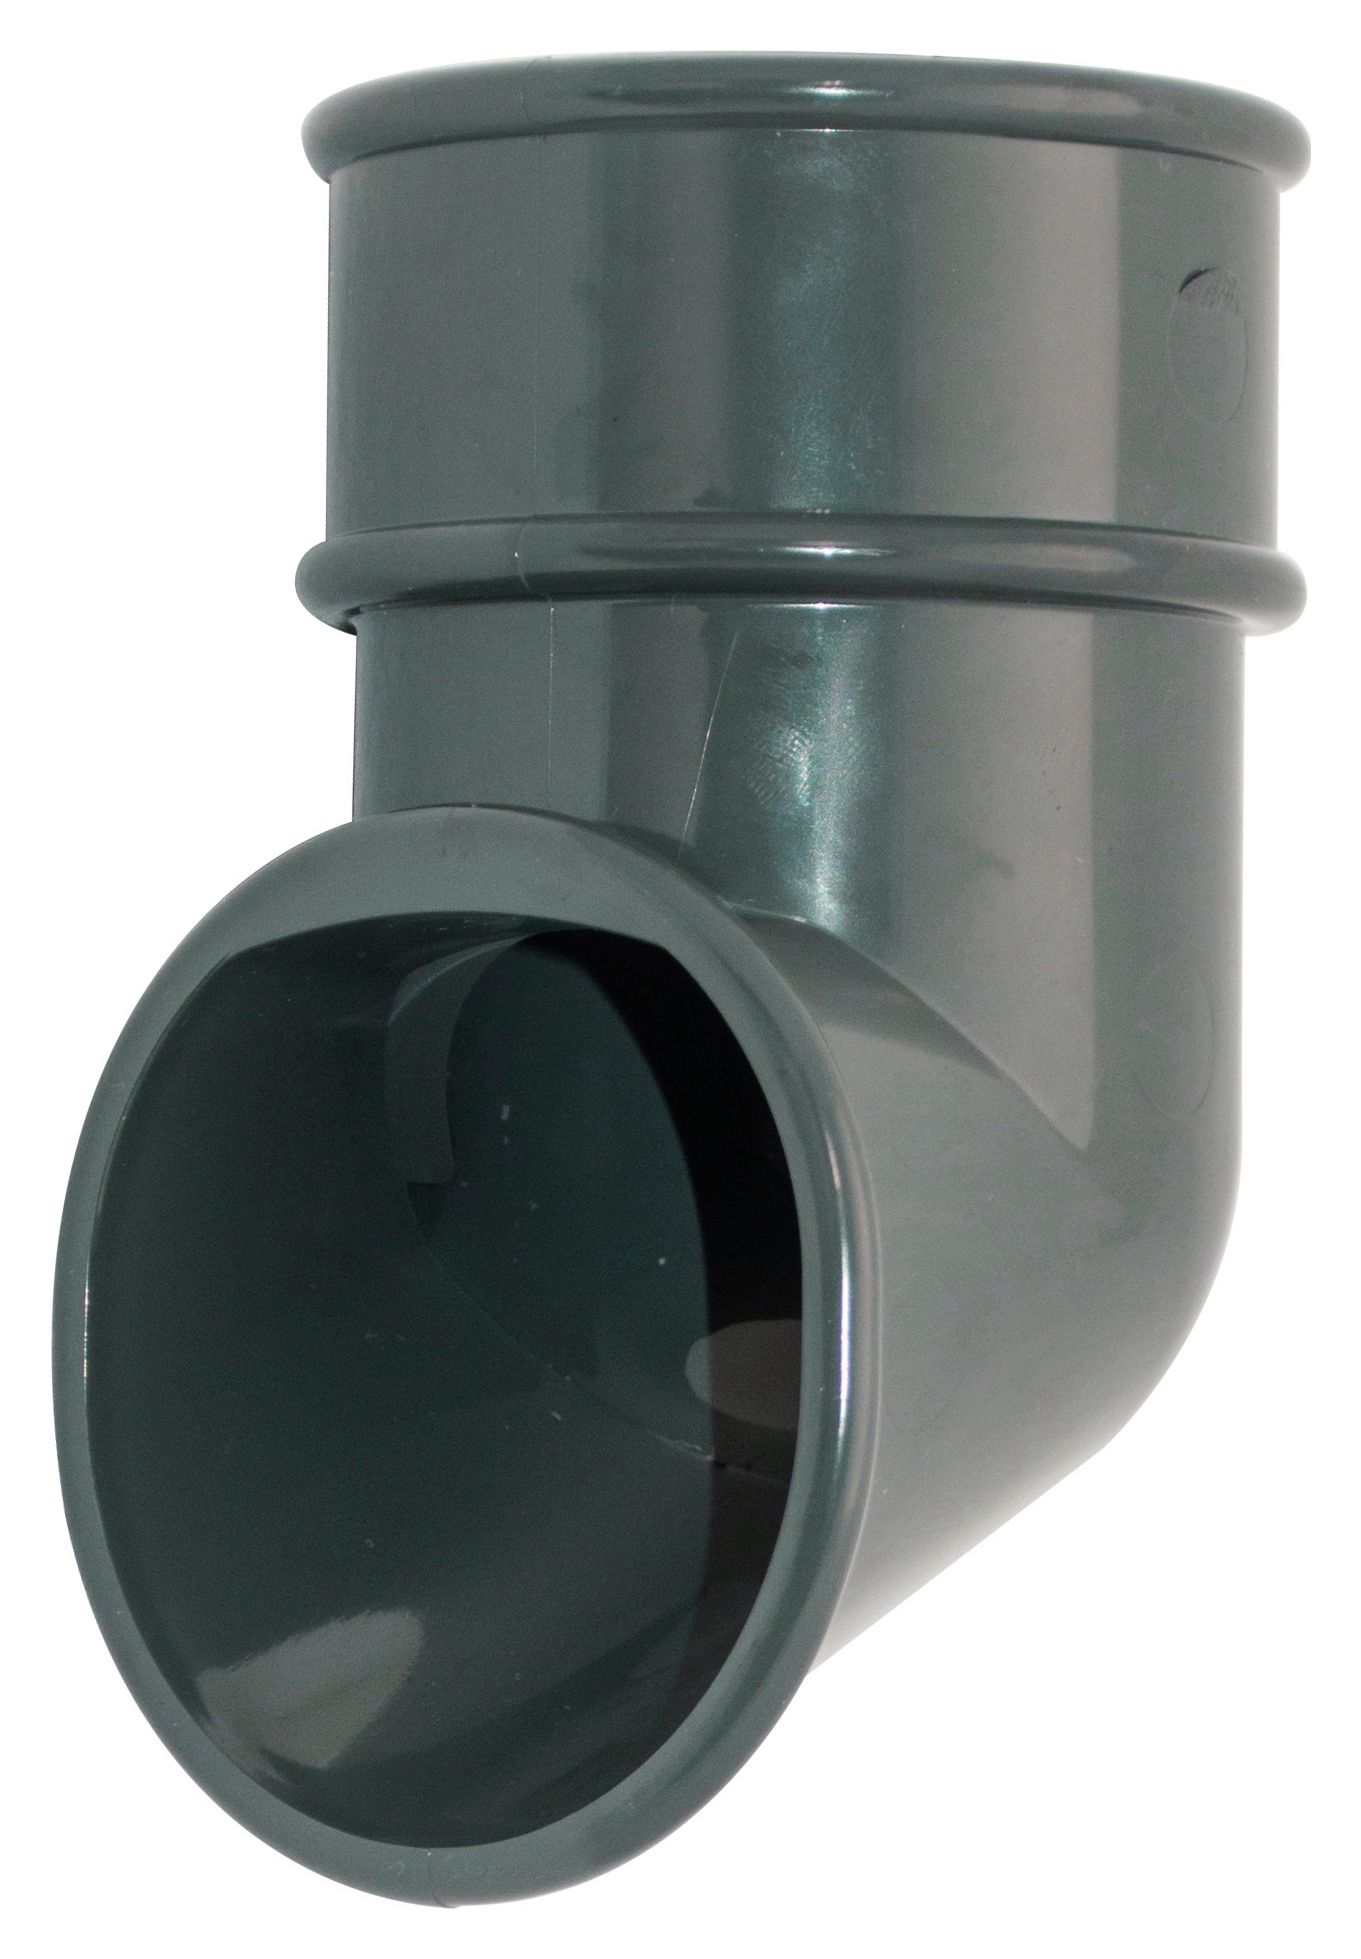 Image of FloPlast 68mm Round Line Downpipe Shoe - Anthracite Grey